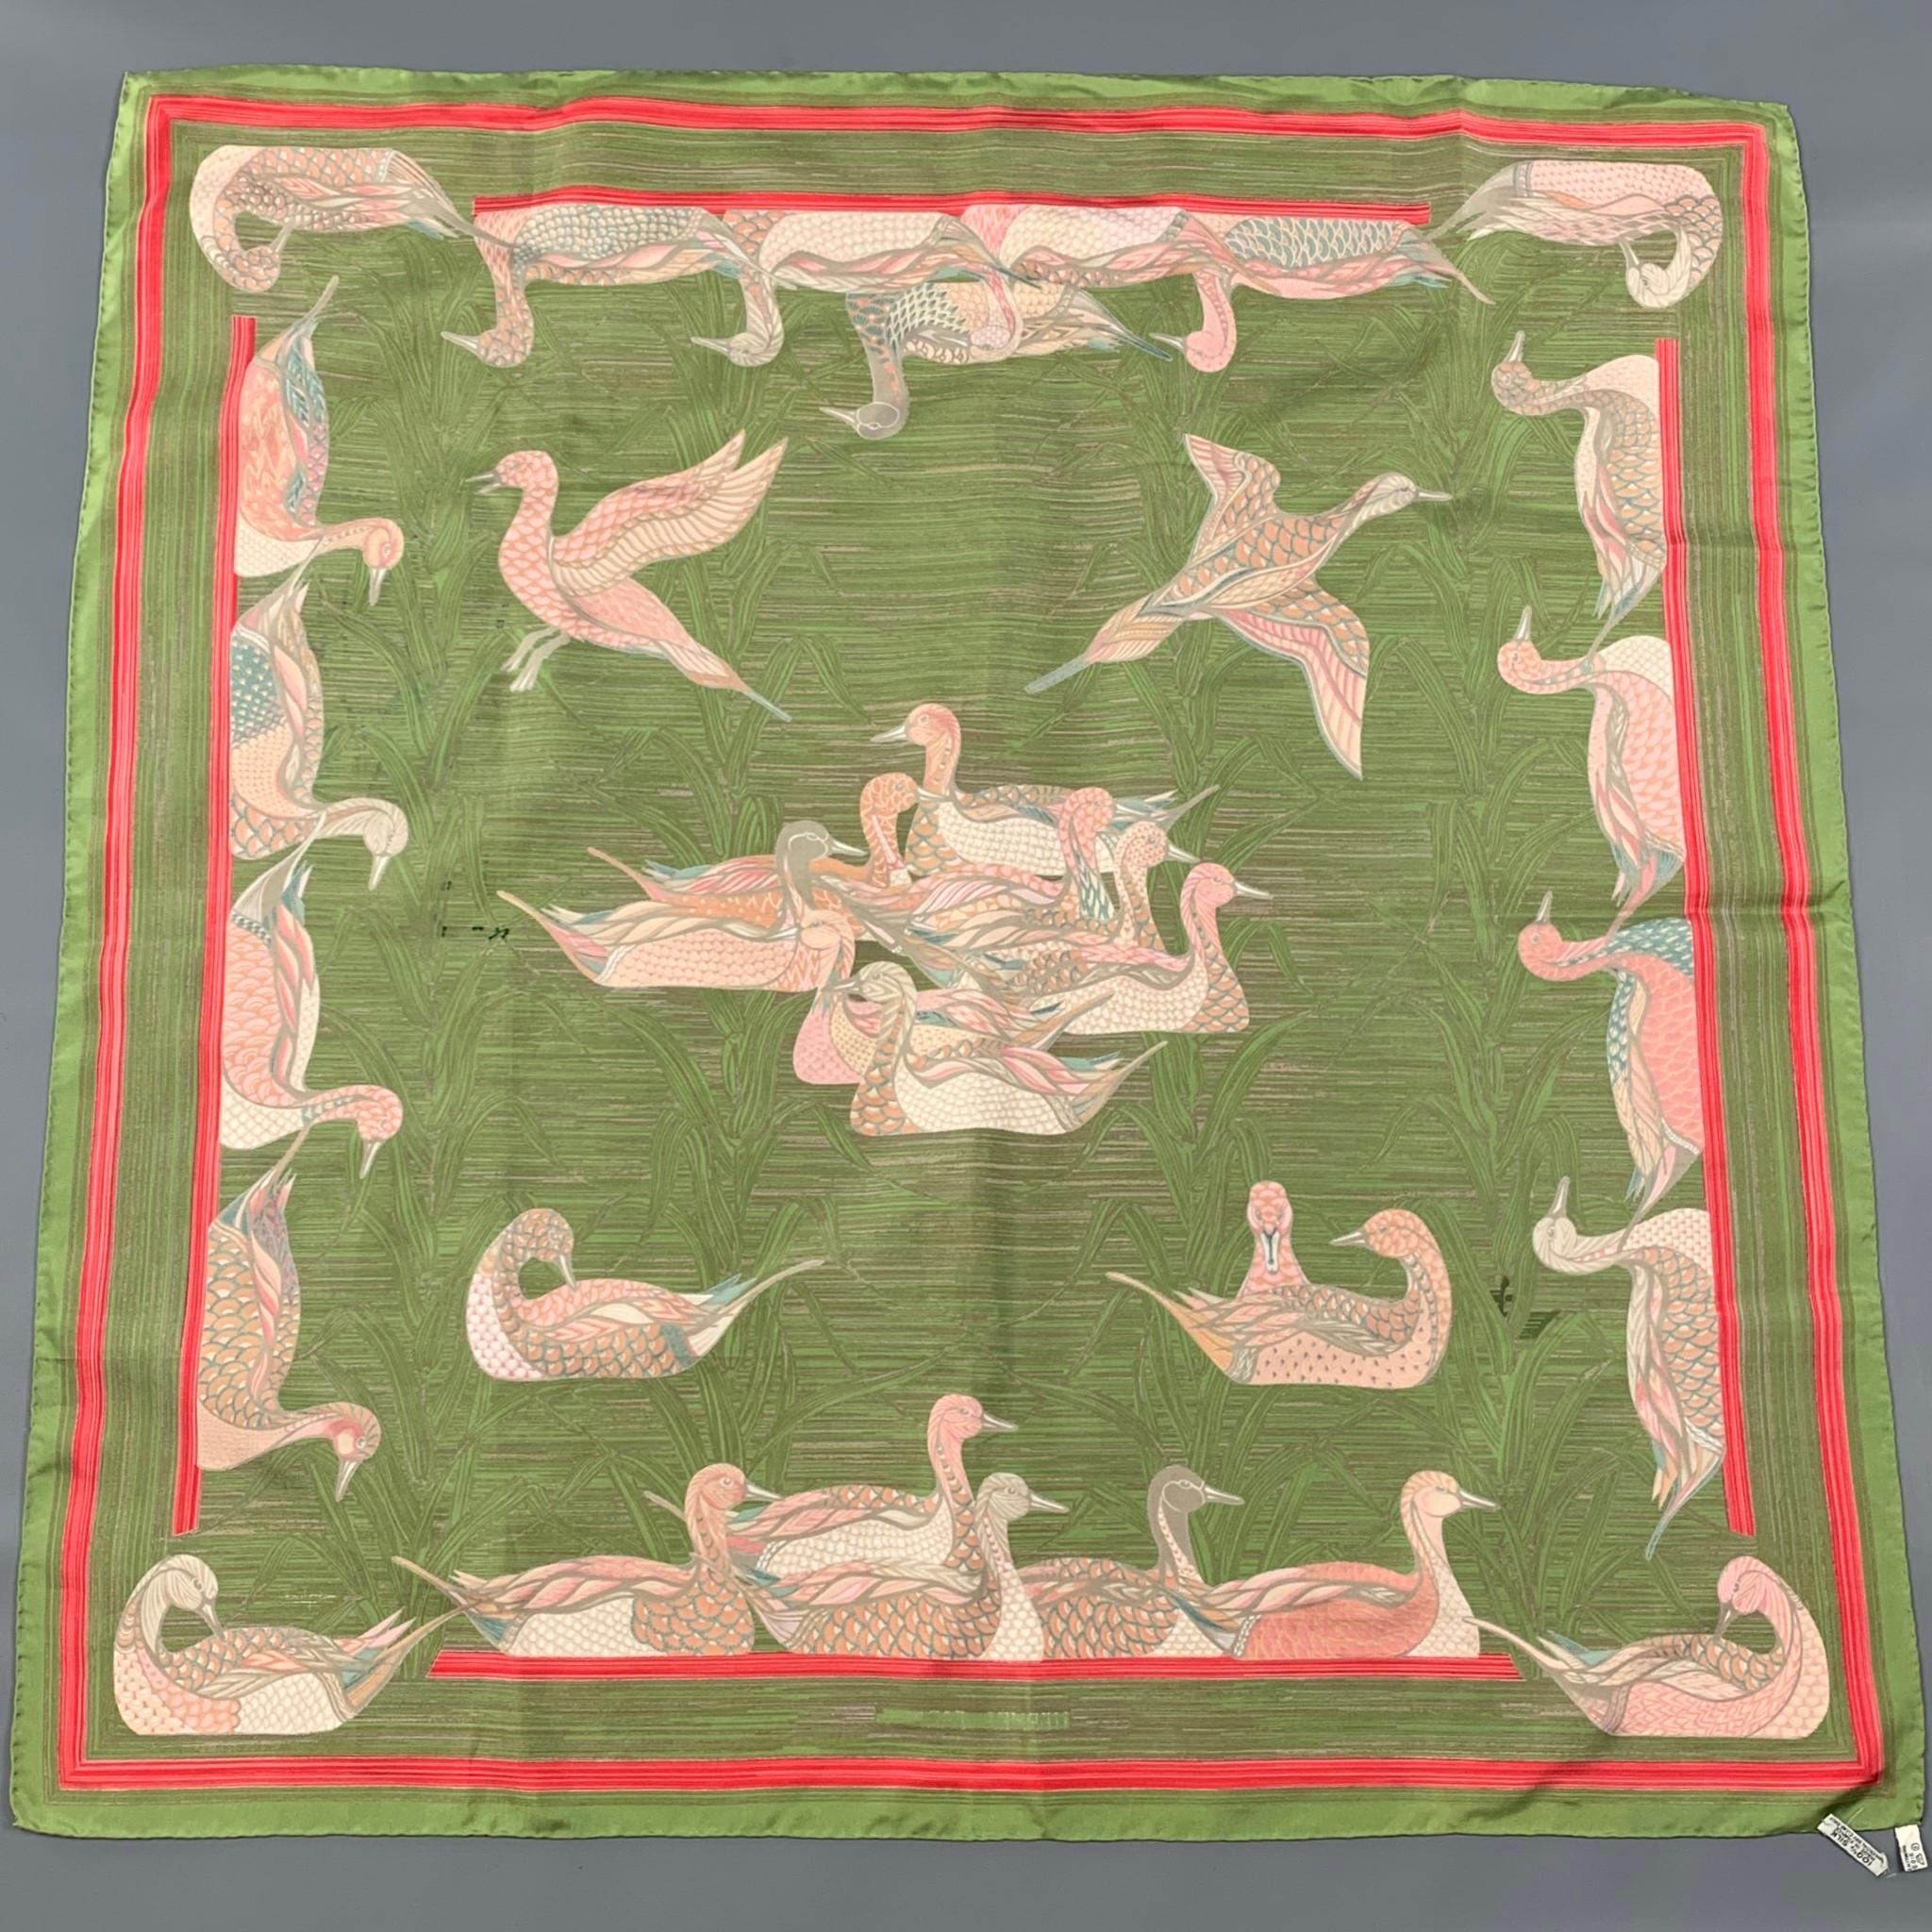 HERMES LA MARE AUX CANARDS Green Pink Print Silk Scarf 1